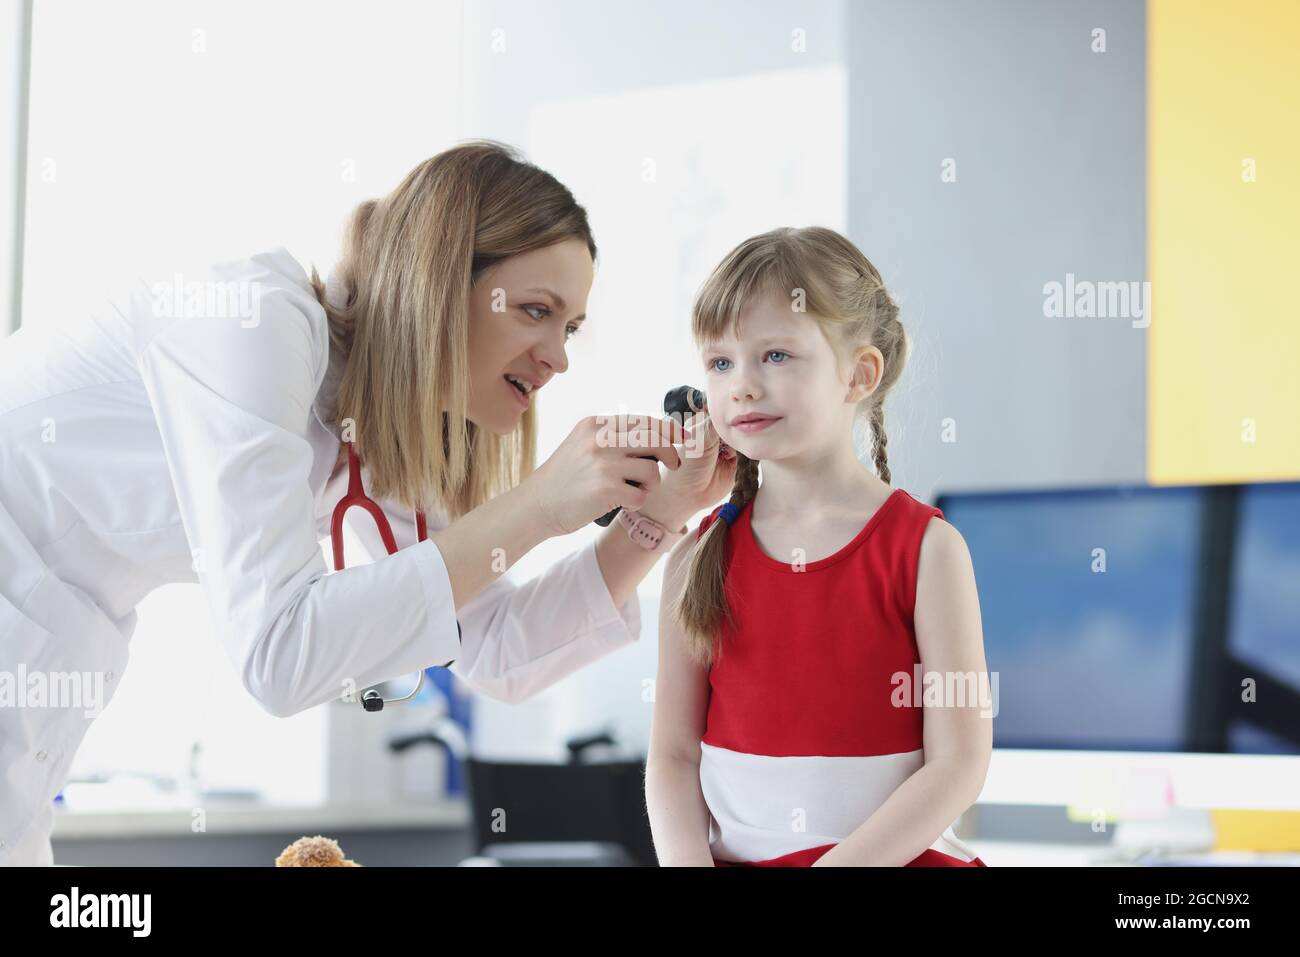 Doctor conducts medical examination of ear of little girl Stock Photo